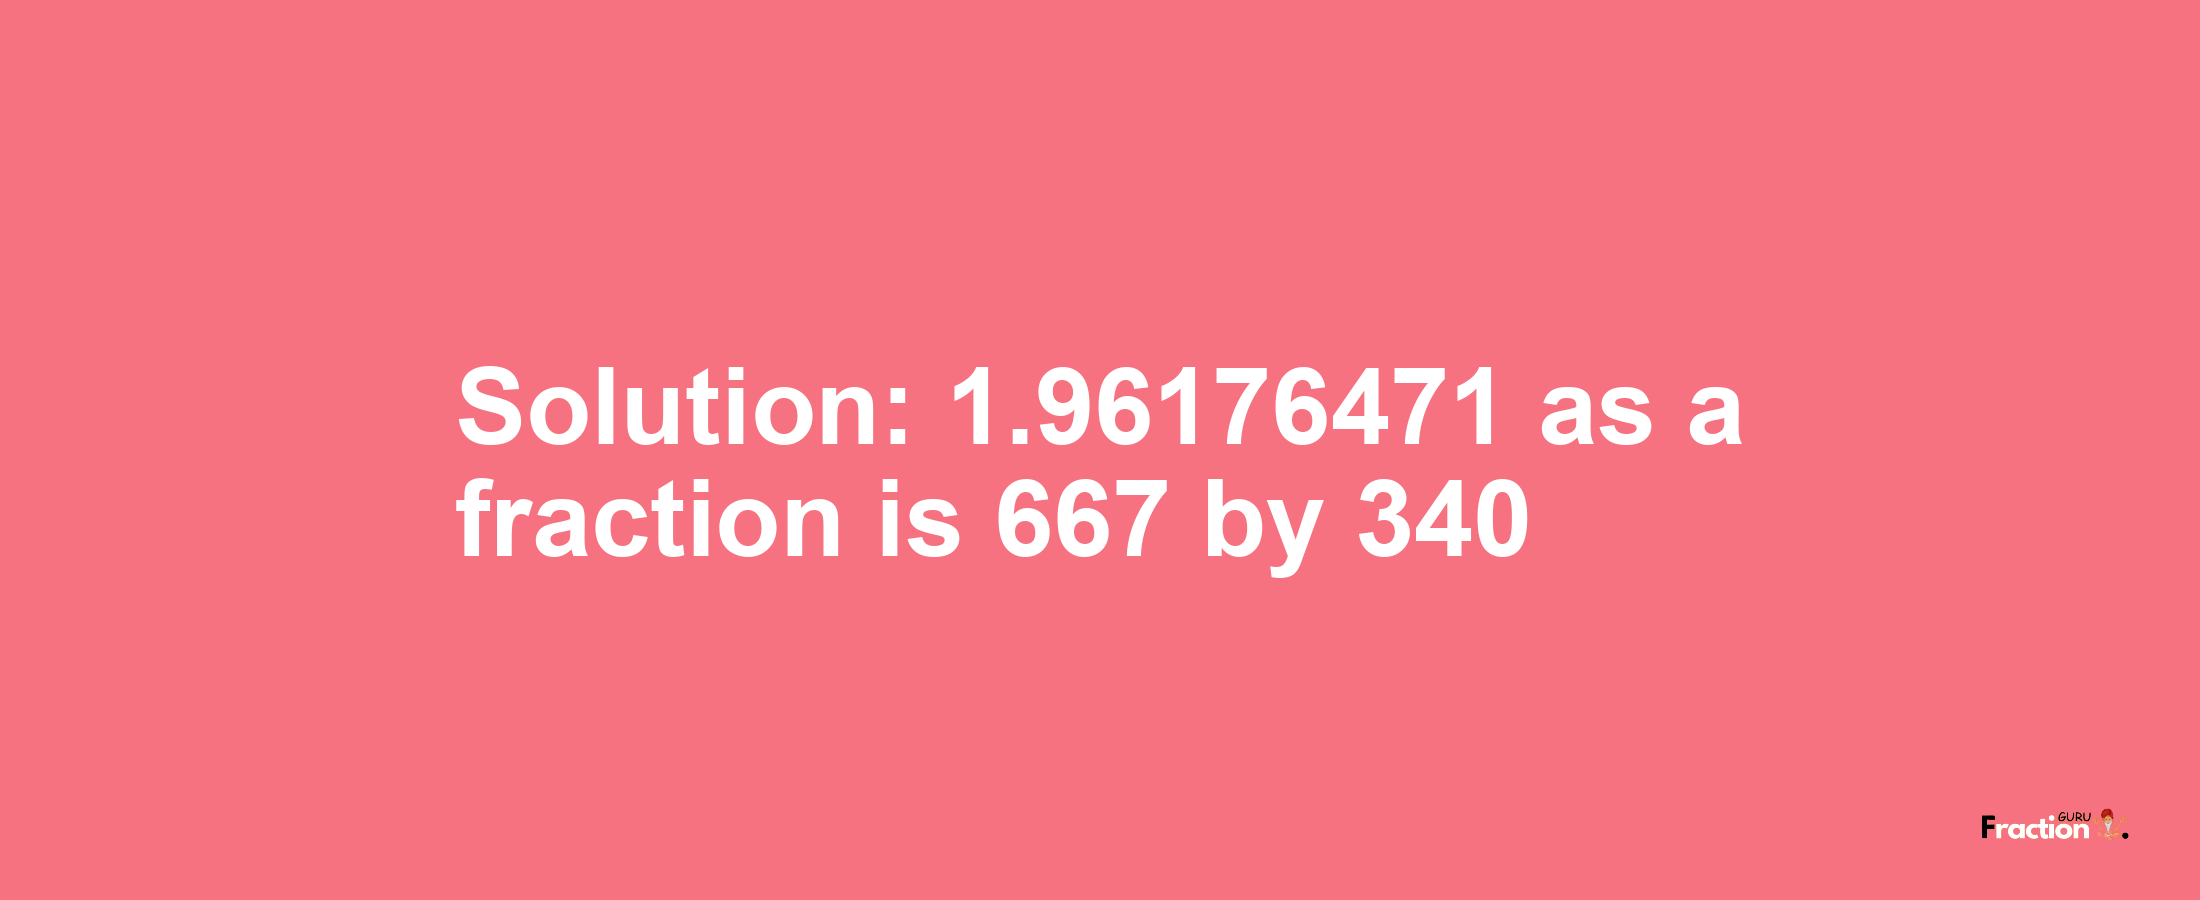 Solution:1.96176471 as a fraction is 667/340